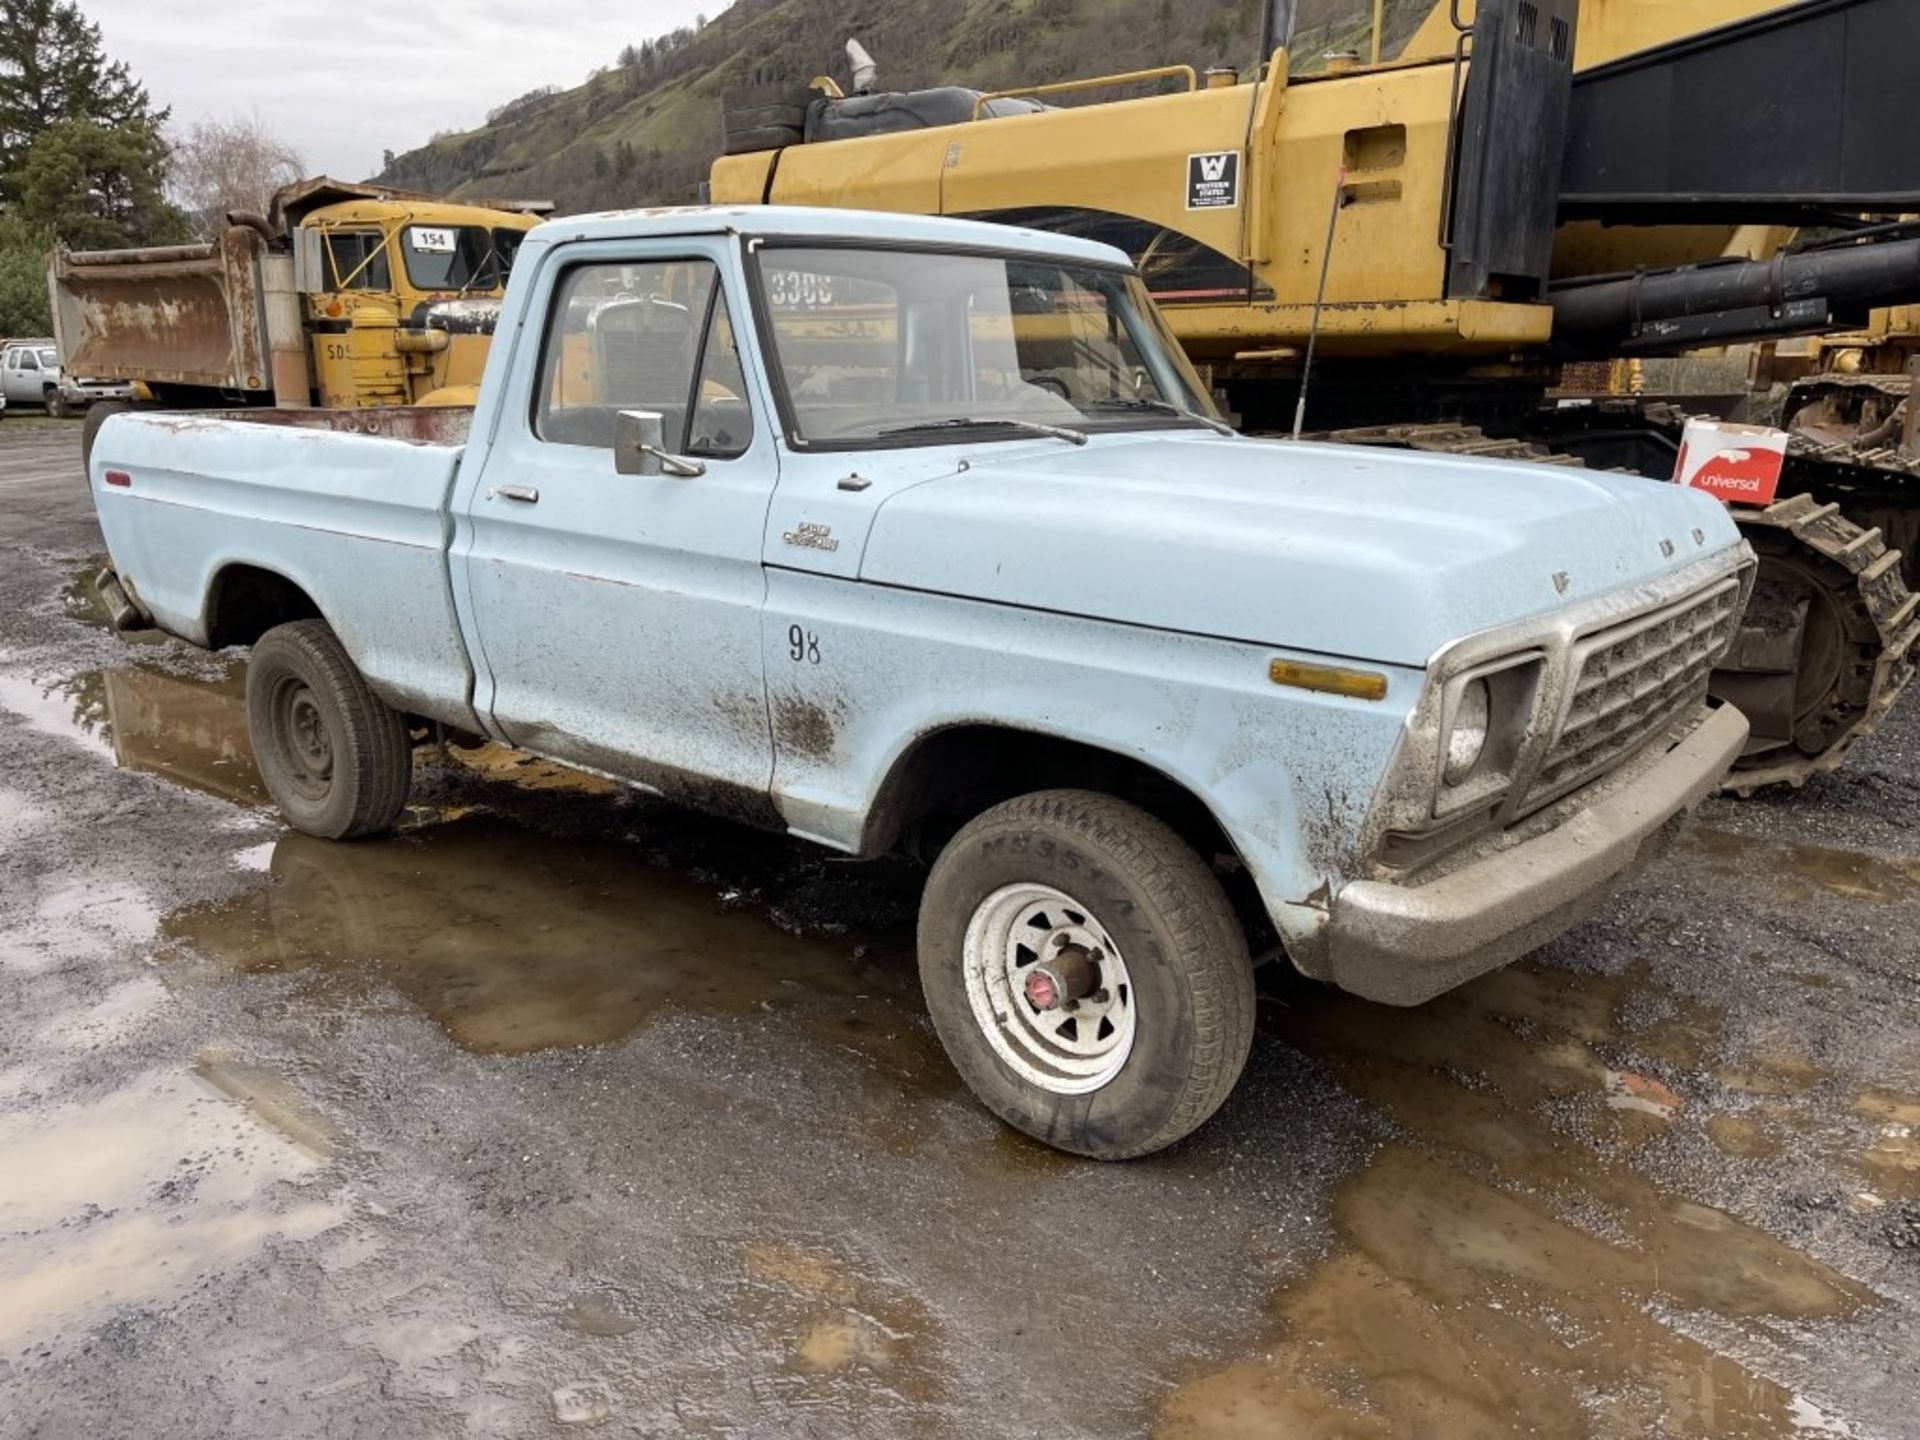 1978 Ford F150 Pickup - Image 4 of 5